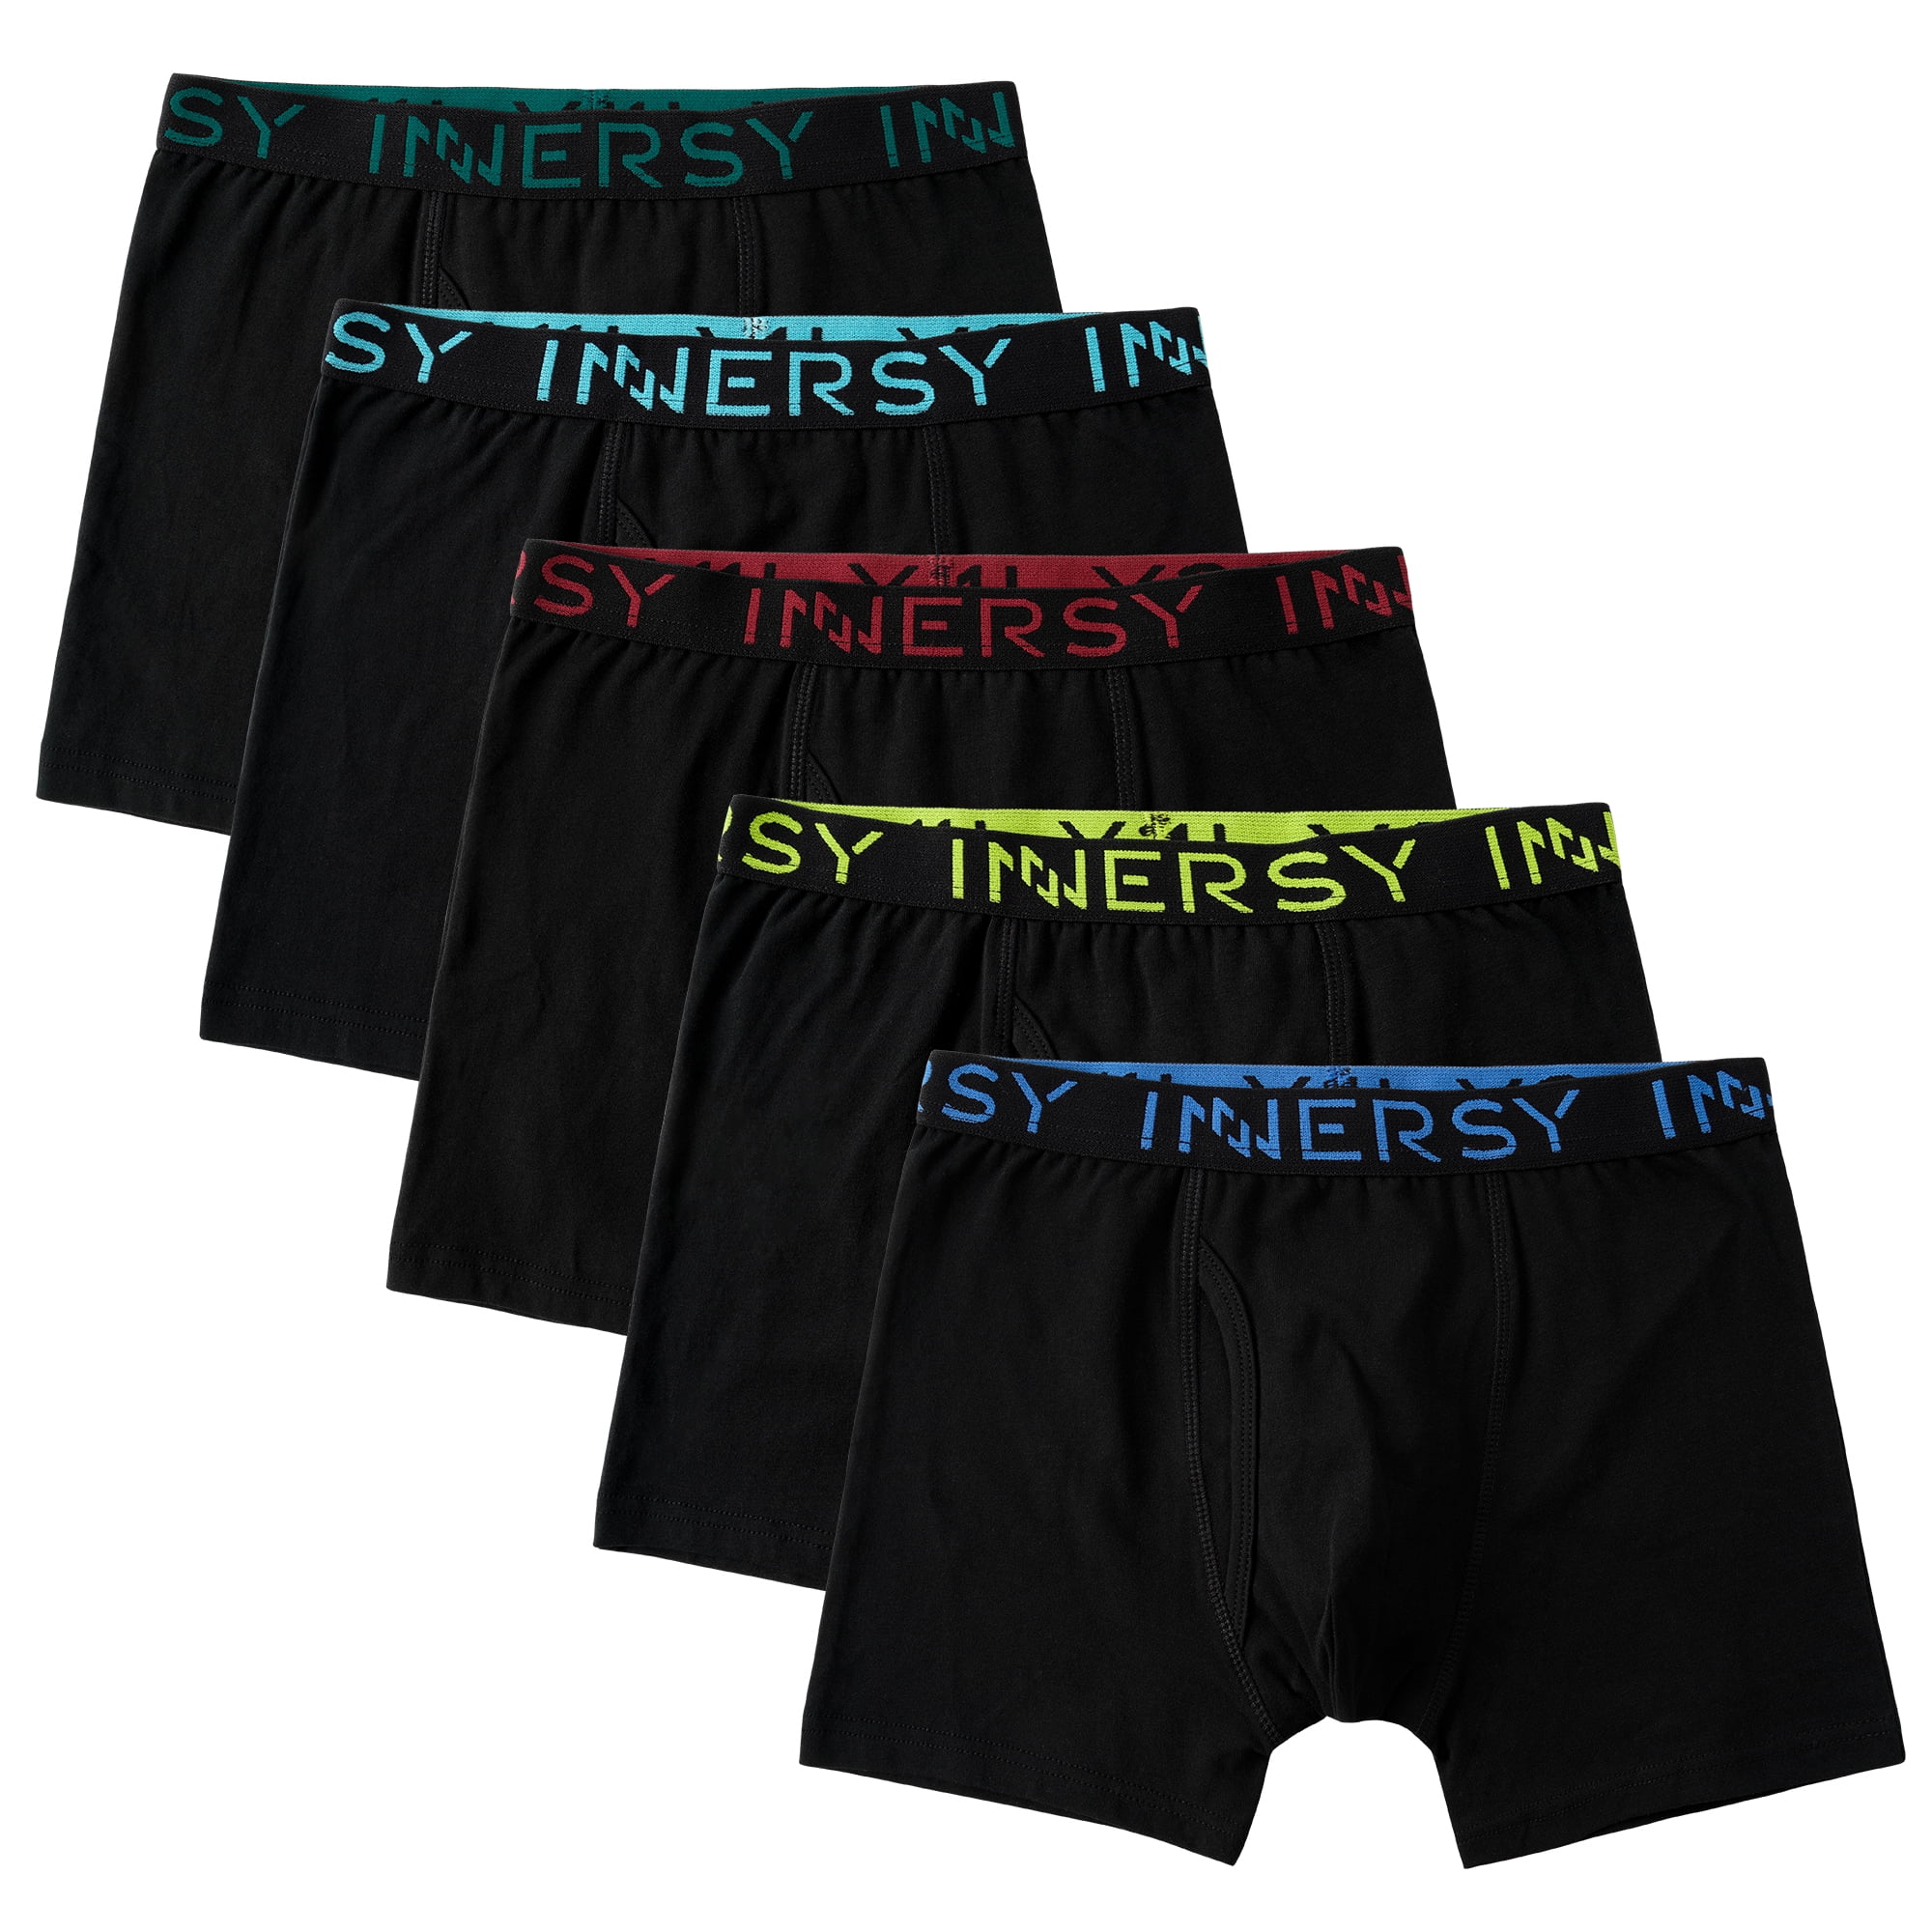 Tahari Big Boys 5-Pack Solid Color Cotton Boxer Briefs with Logo Waistband  - Macy's